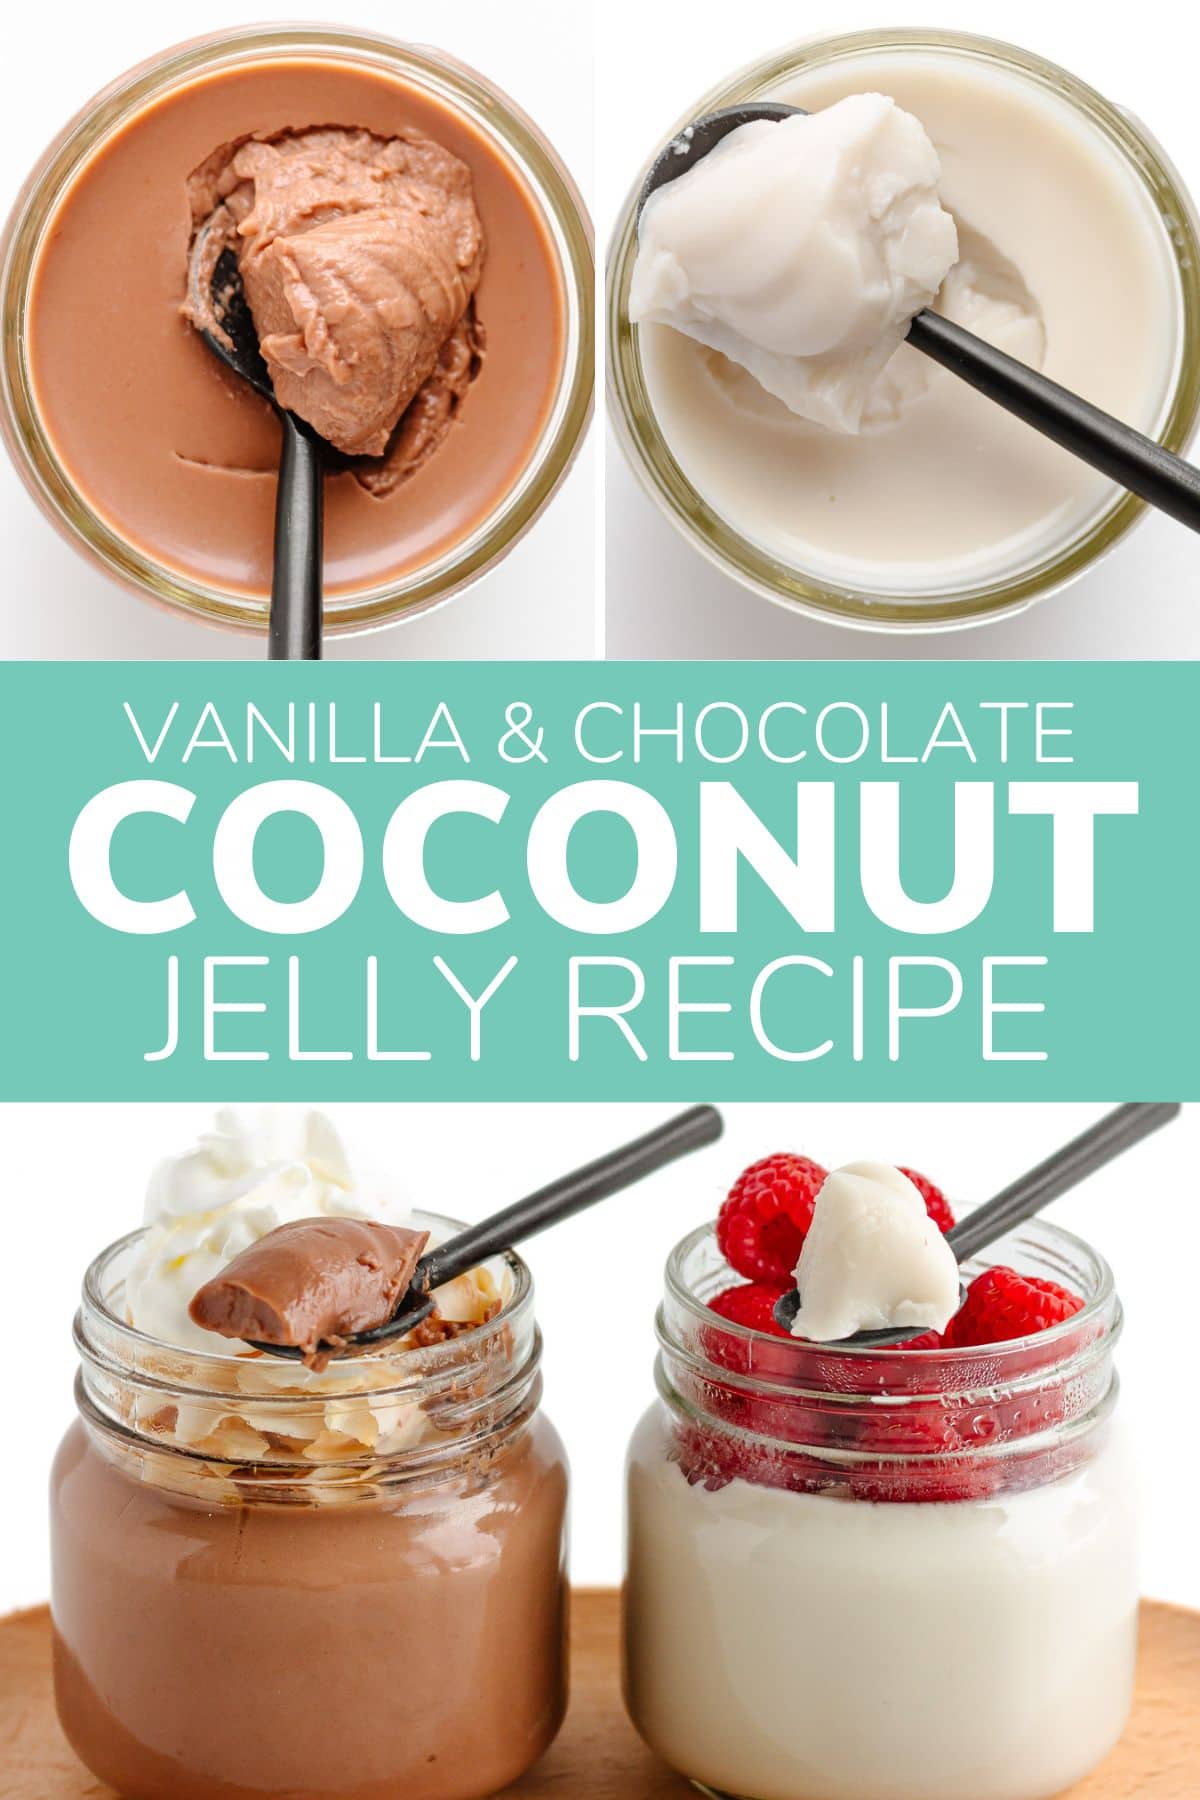 Collage graphic showing photos of vanilla and chocolate flavored coconut jelly with text overlay that reads "Vanilla & Chocolate Coconut Jelly Recipe".